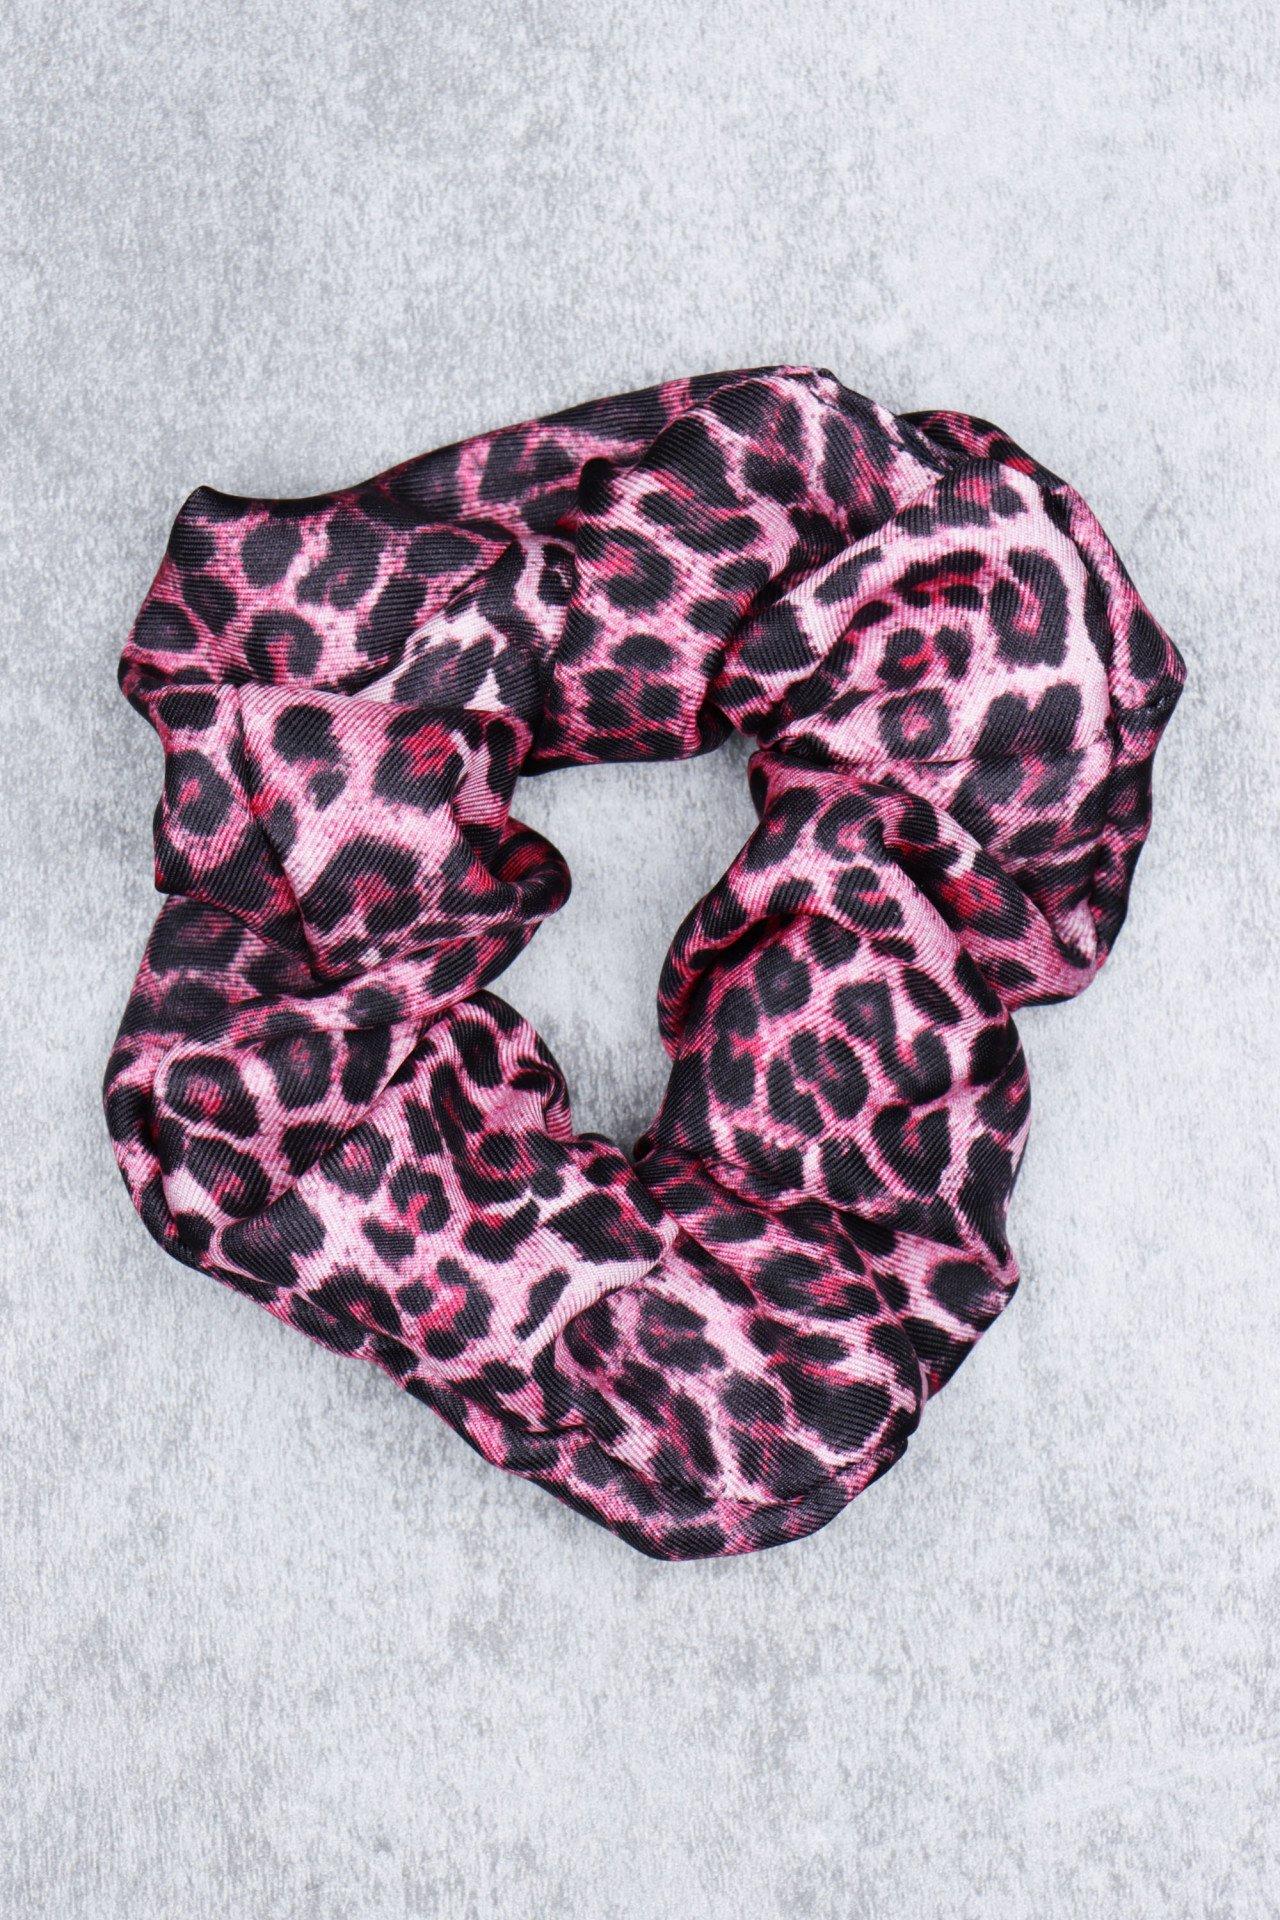 Image of Atelier F&B Der Pink Panther Scrunchie - ONE SIZE